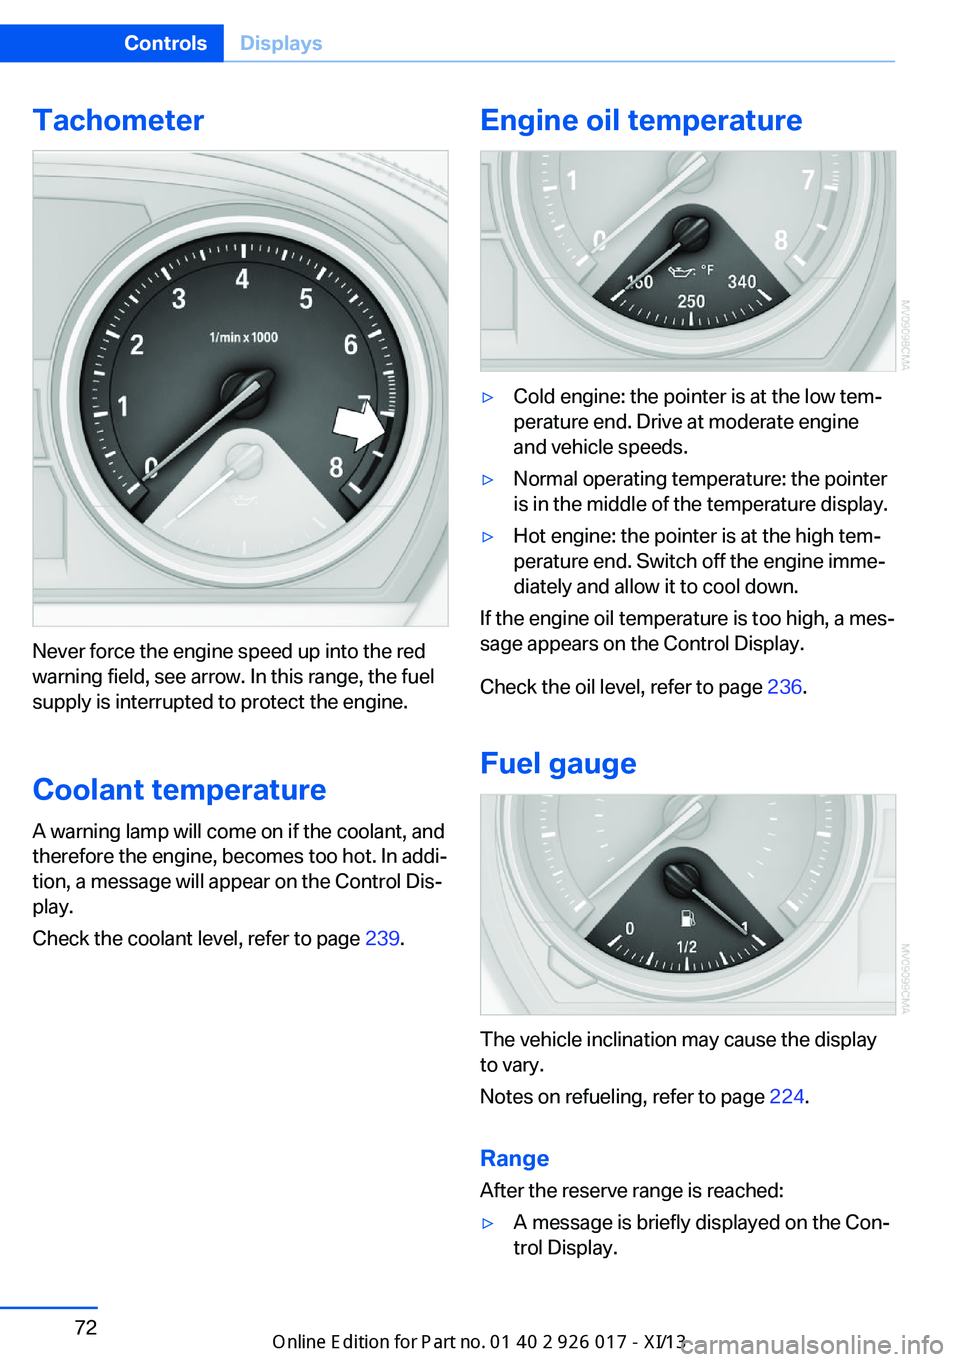 BMW Z4 2013 E89 Owners Guide Tachometer
Never force the engine speed up into the red
warning field, see arrow. In this range, the fuel
supply is interrupted to protect the engine.
Coolant temperature A warning lamp will come on i